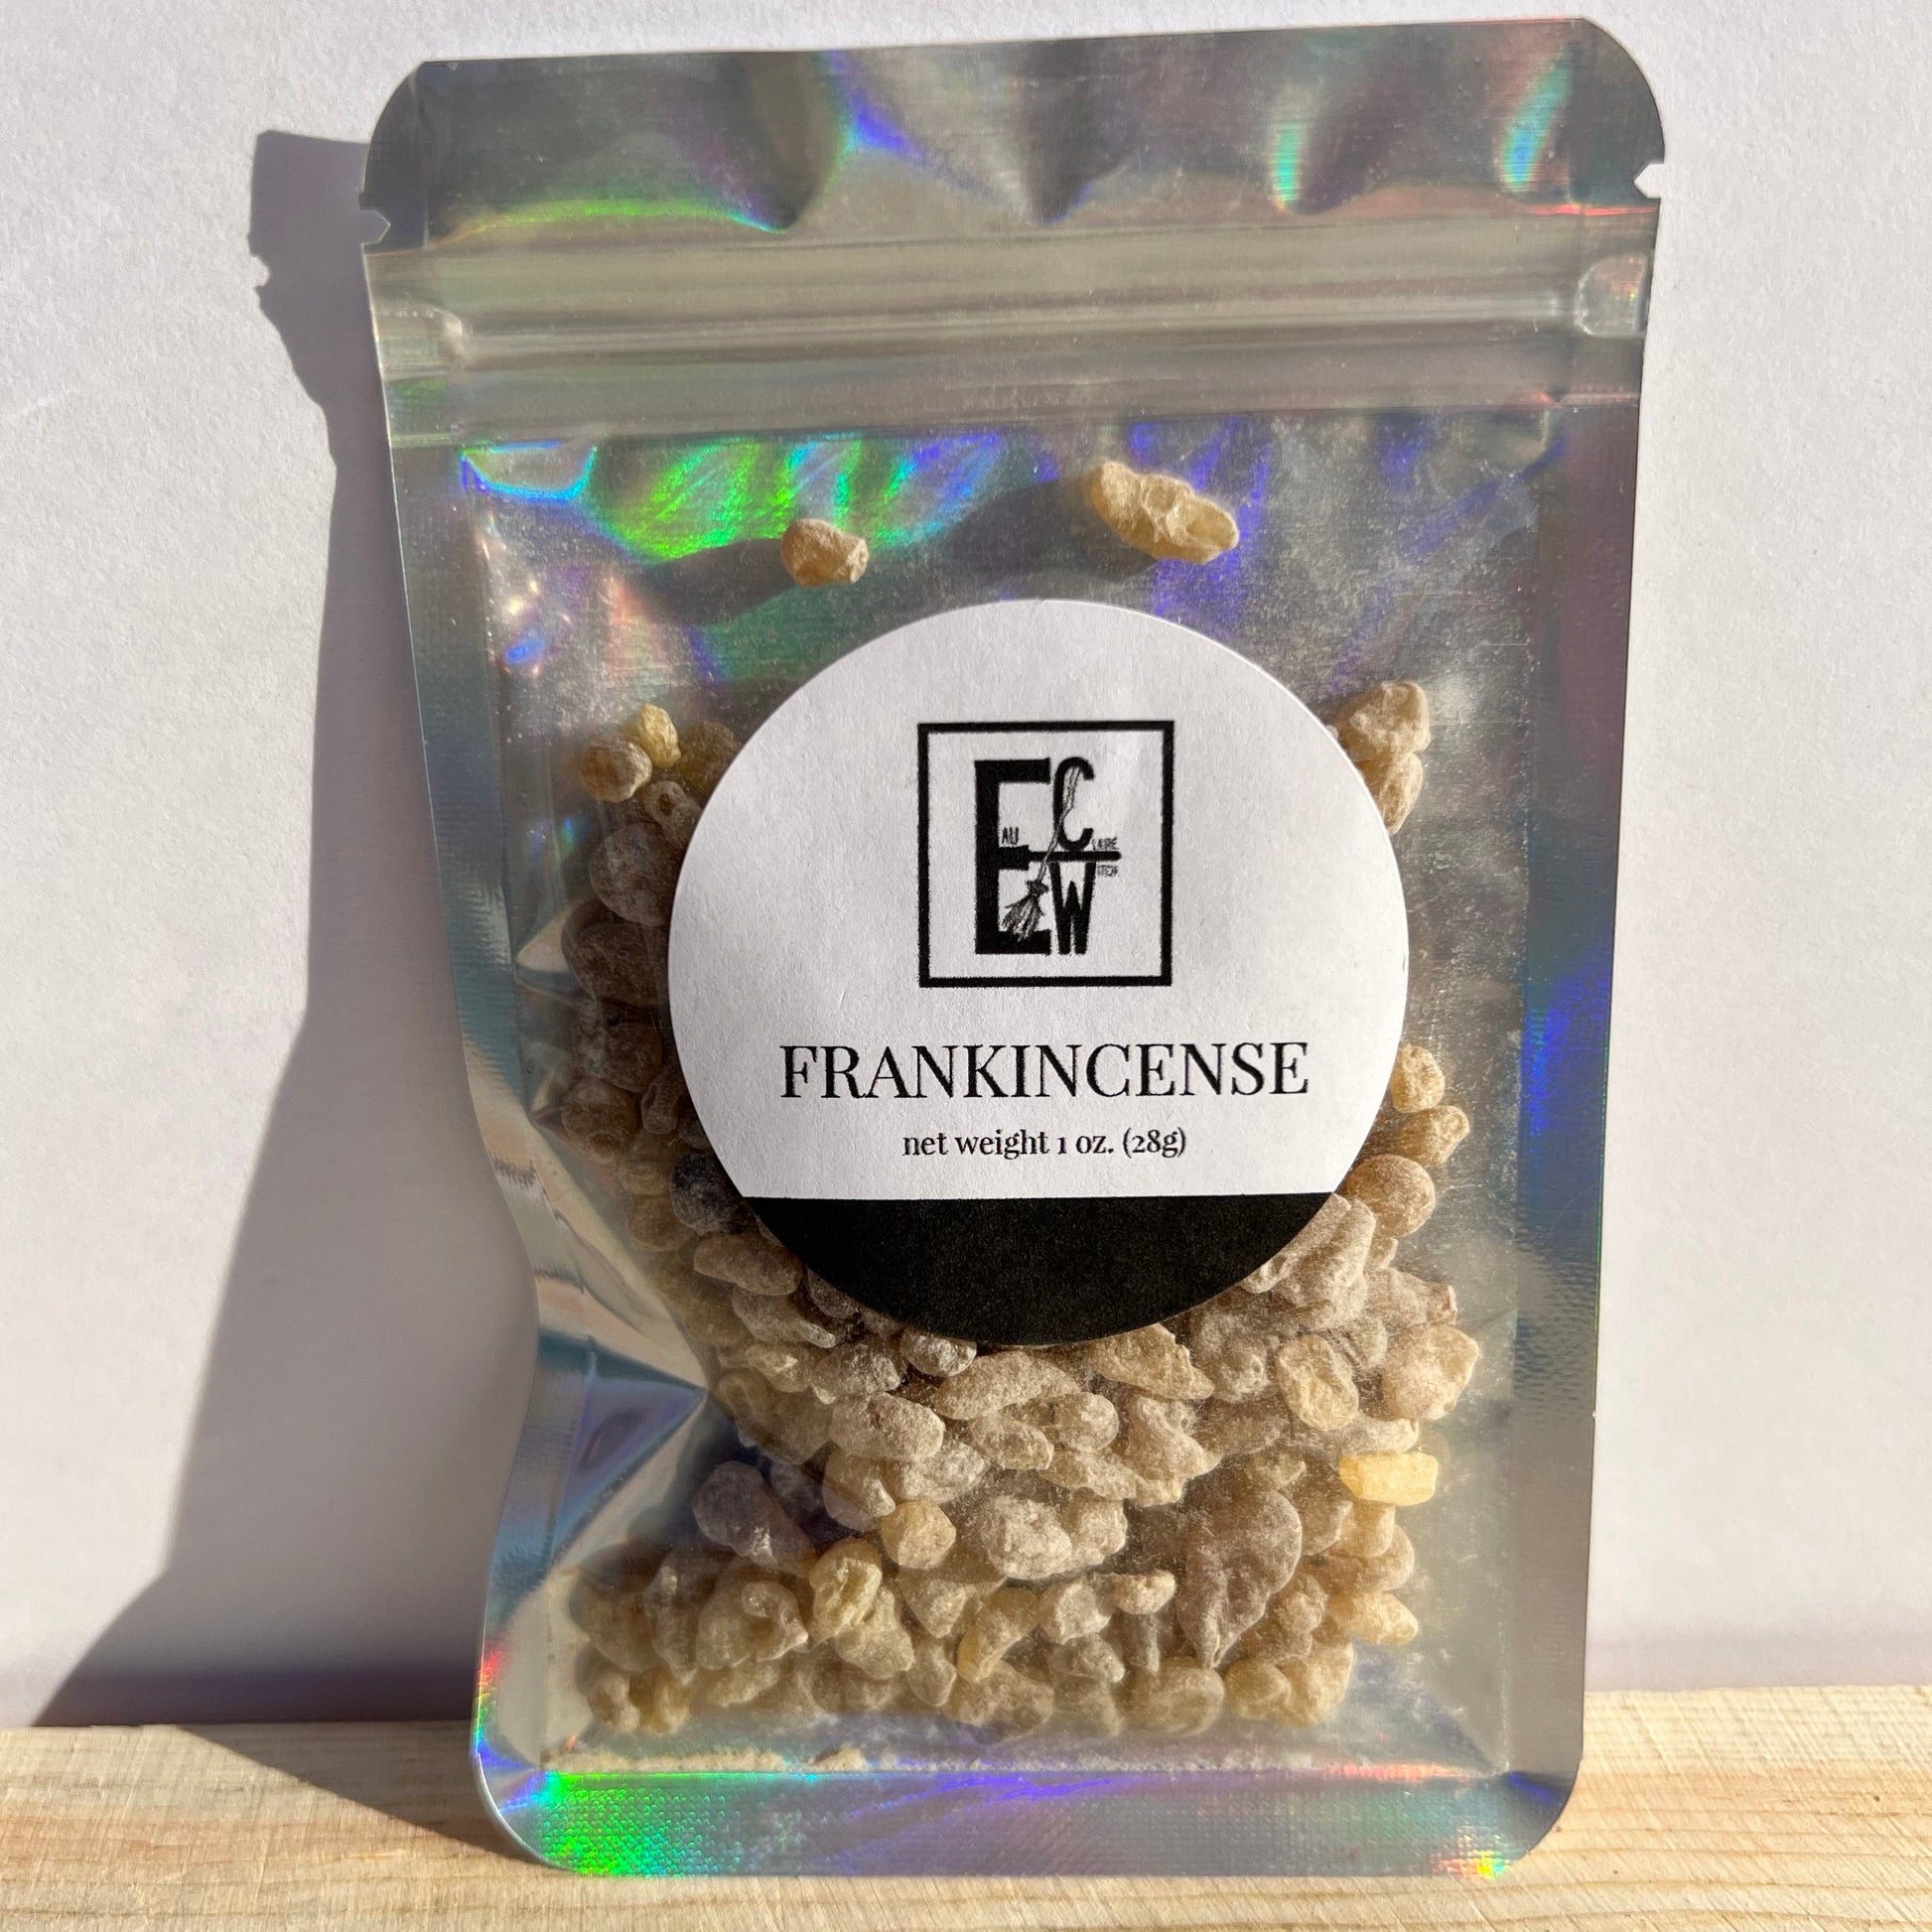 1 ounce of frankincense tears, in a holographic, zip-top bag. It features a label of contents & weight front & center.